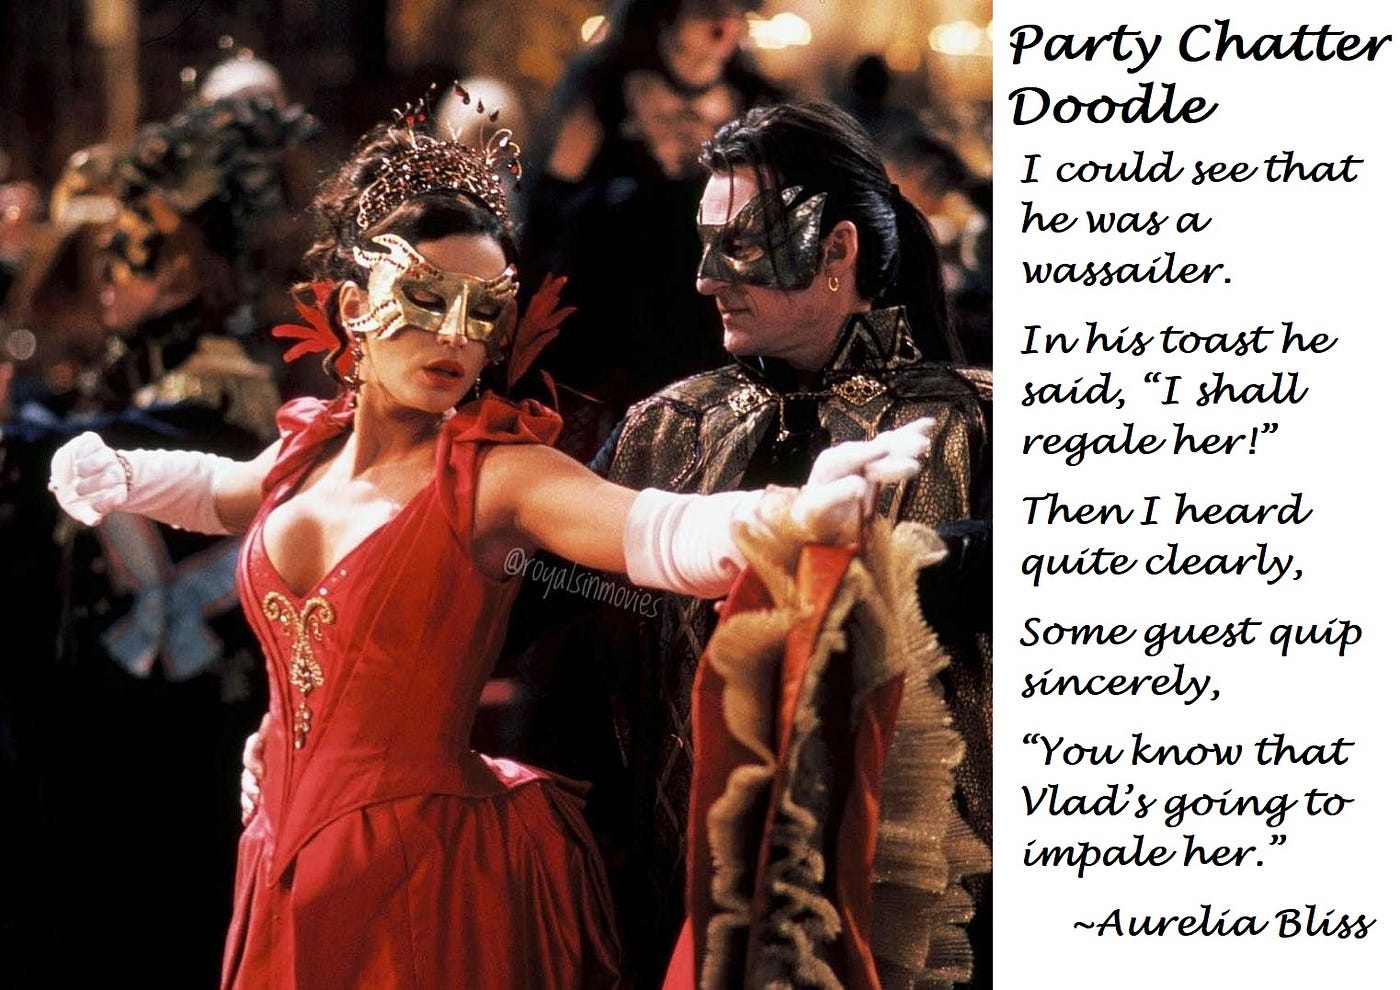 The masquerade ball from Van Helsing.